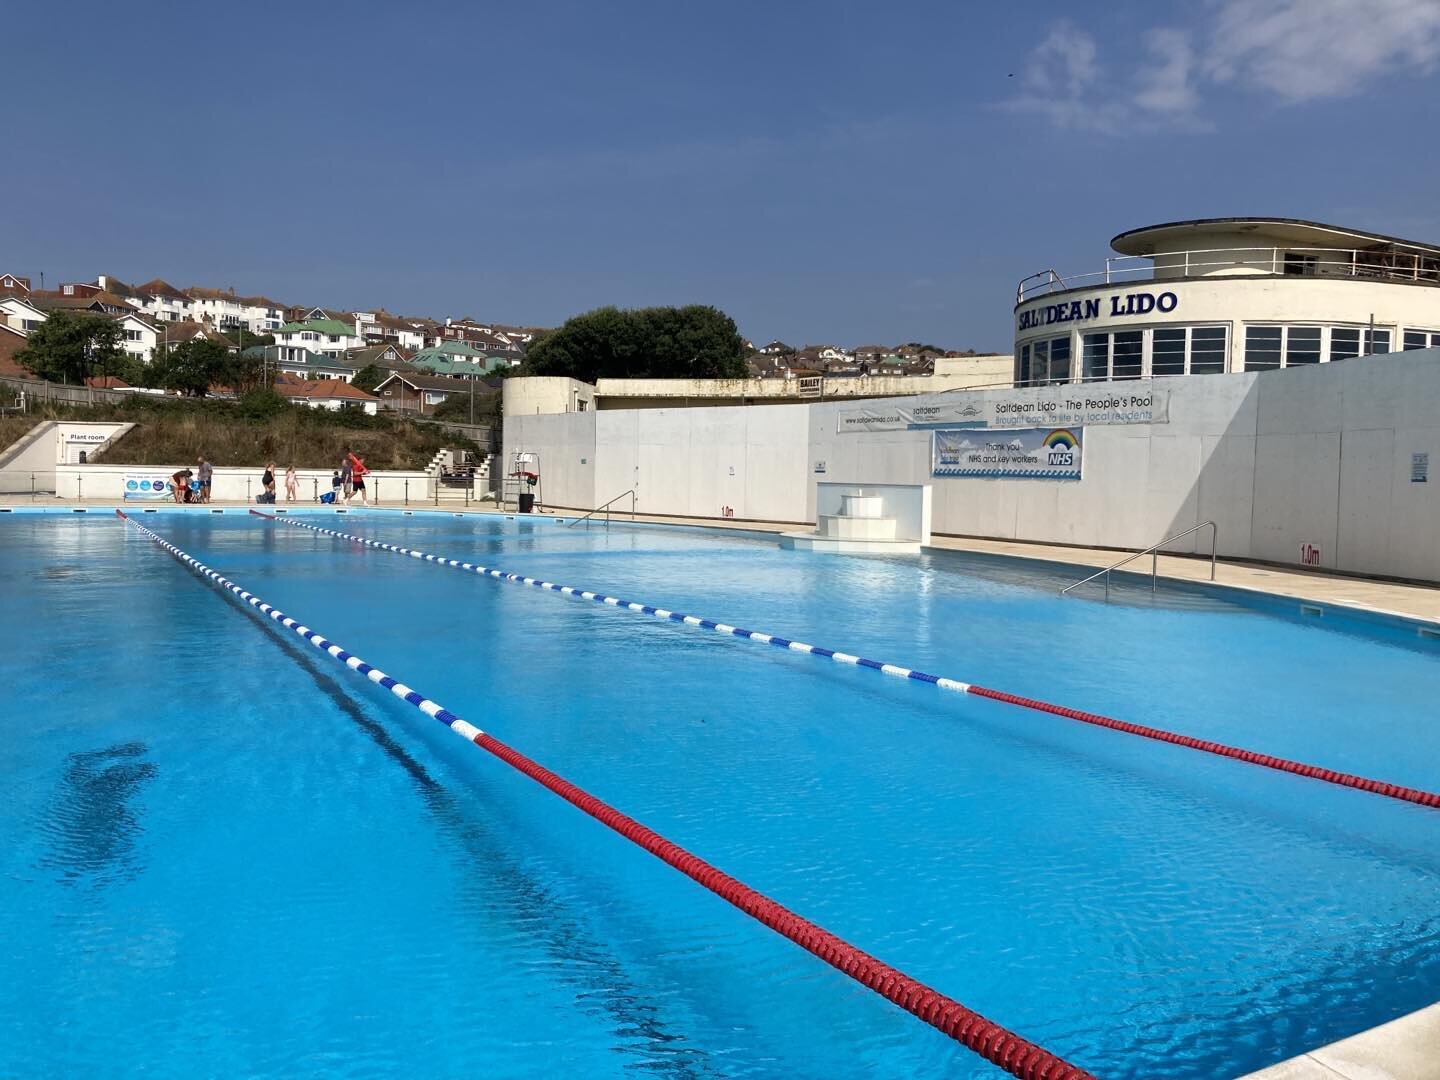 Fantastic news! The stunning Art Deco lido in the small seaside town of Saltdean where I grew up, is set to receive a huge funding boost of &pound;1.135 million to help restore its Grade II* listed building. Thanks to everyone who voted and to #brigh